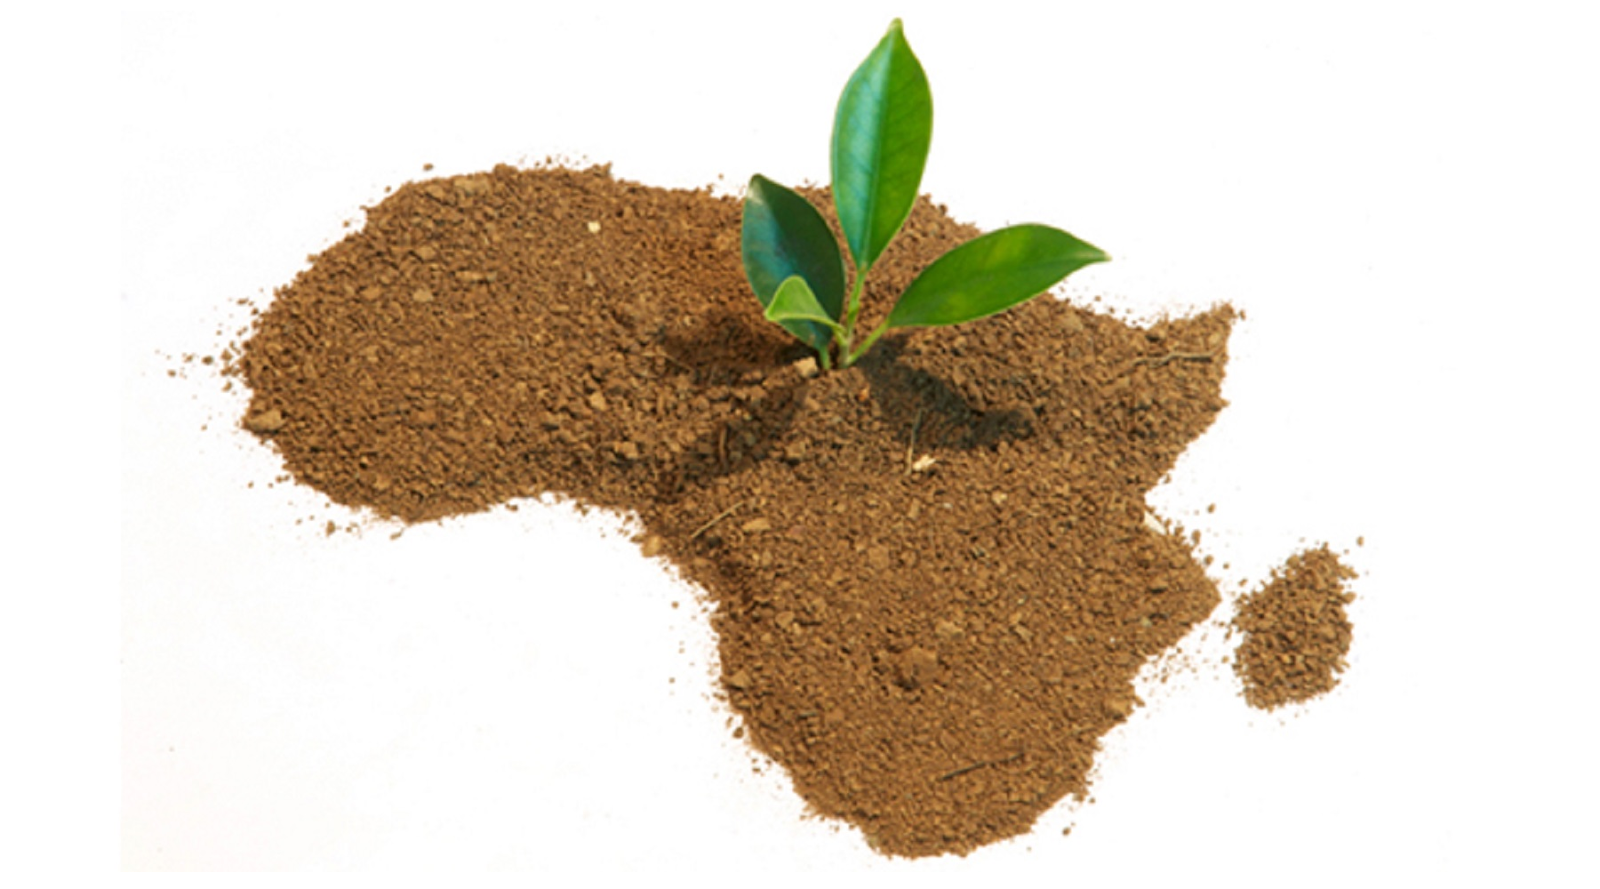 How are Start-up ecosystem in Africa Faring?